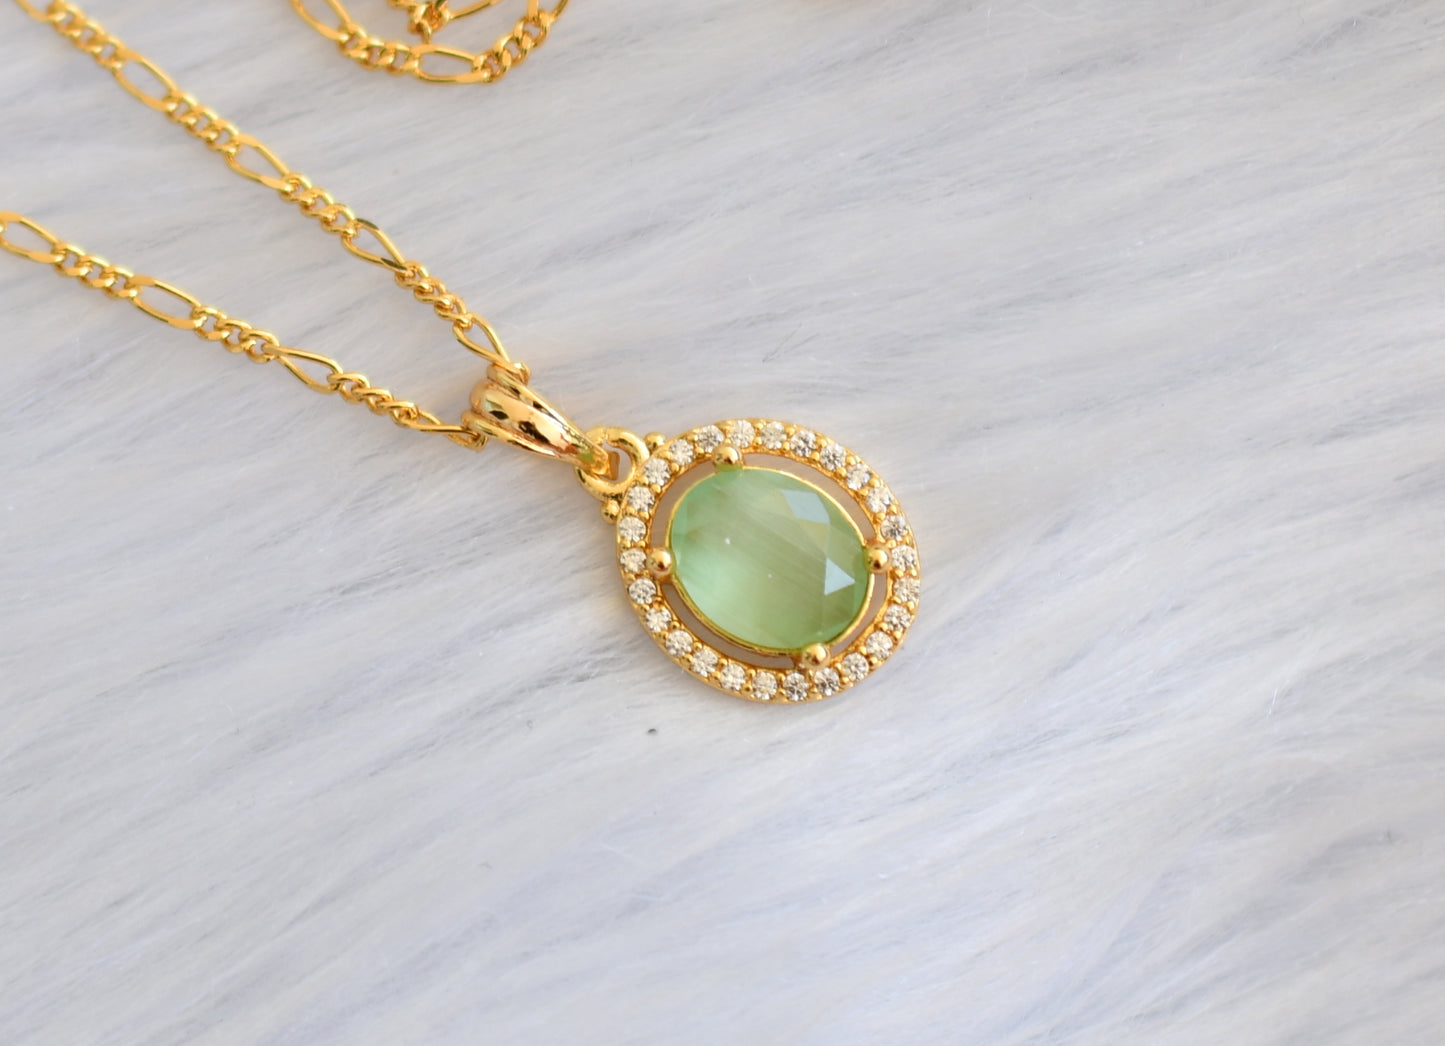 Gold tone white-green pendant with chain dj-39974